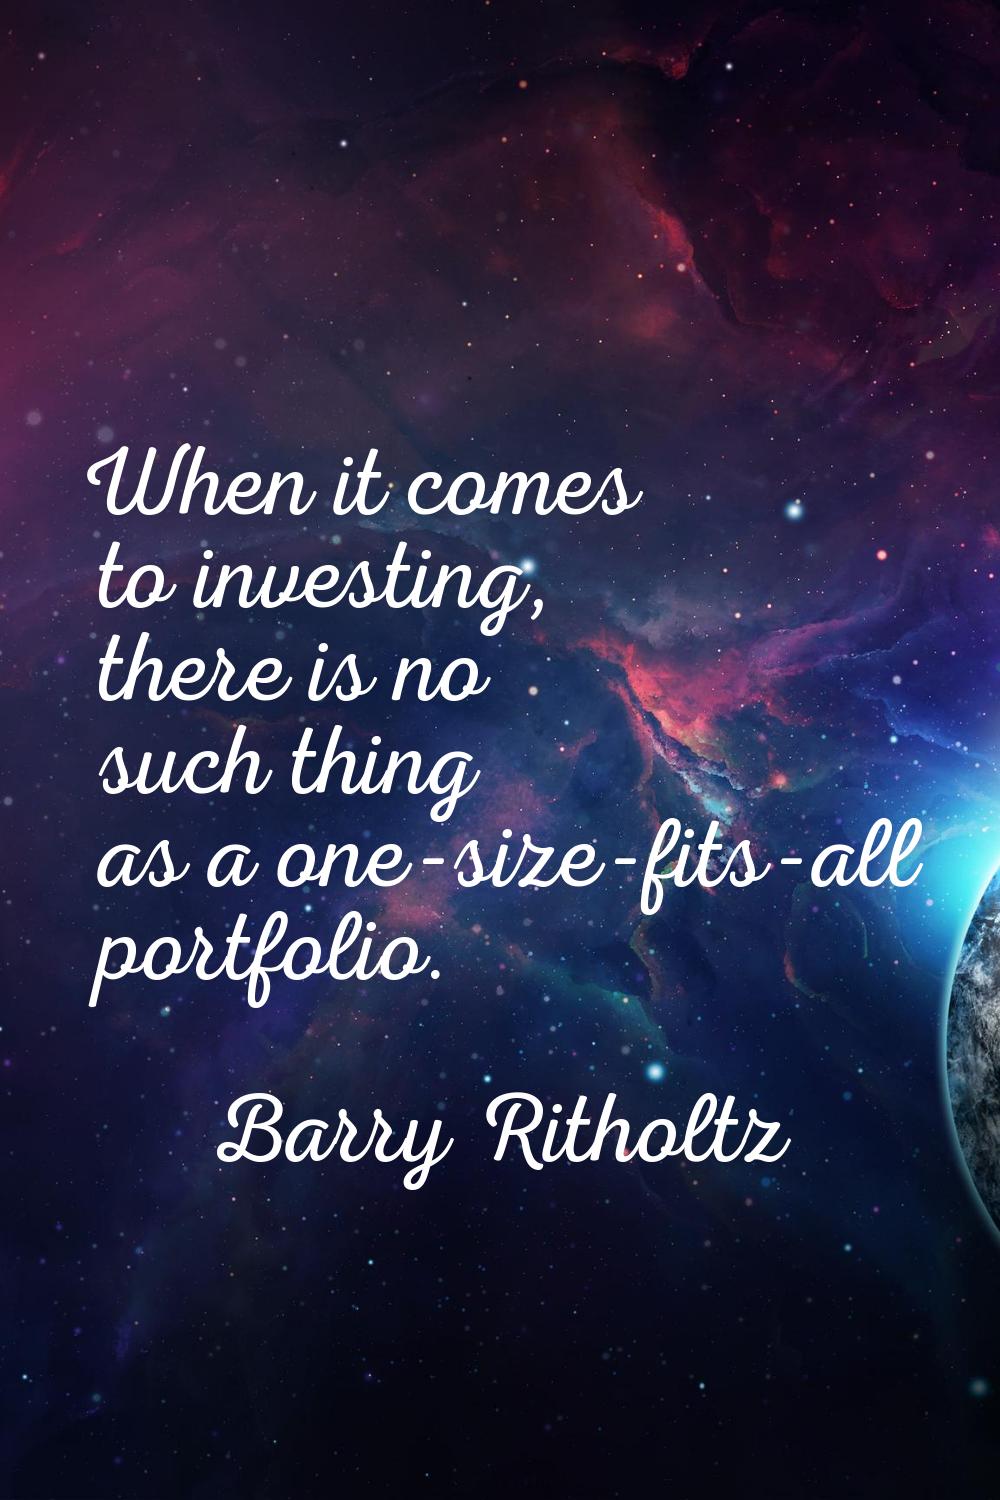 When it comes to investing, there is no such thing as a one-size-fits-all portfolio.